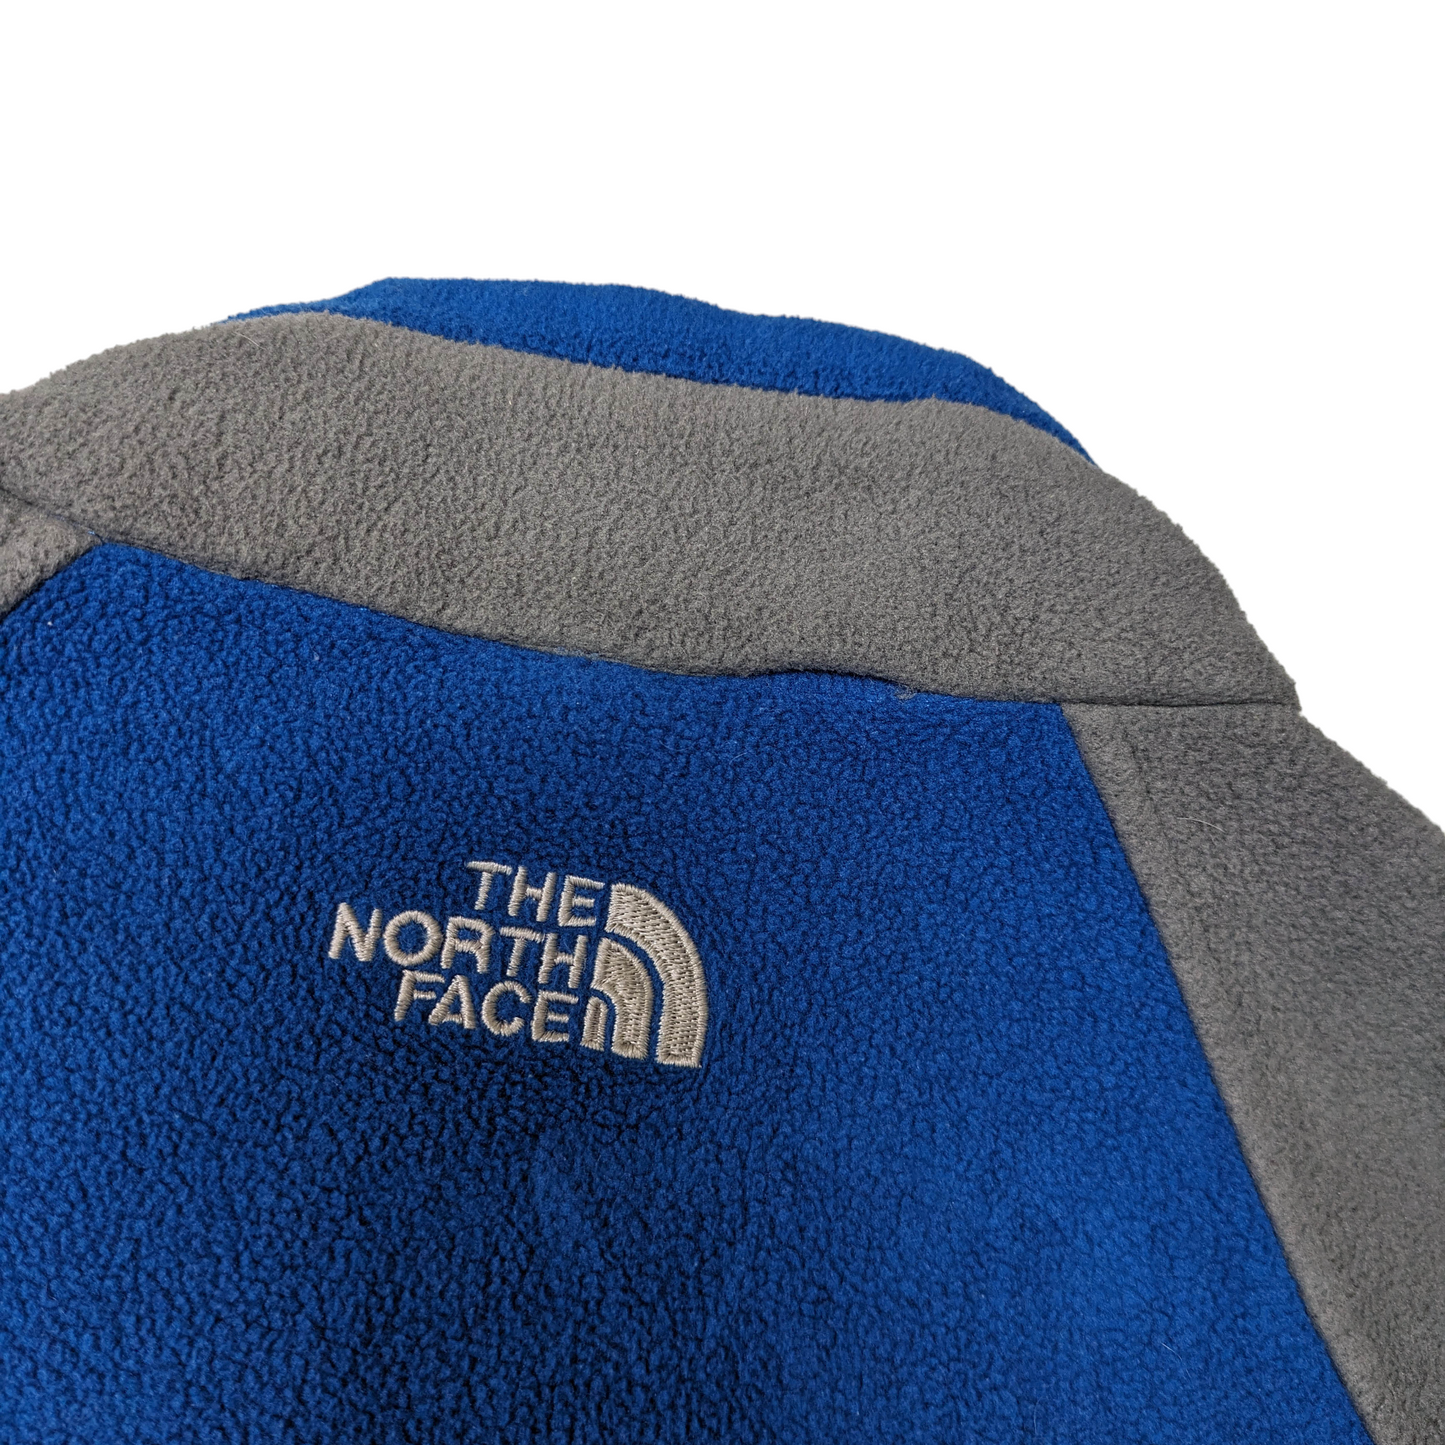 The North Face Fleece Size XS (Youth Size L)